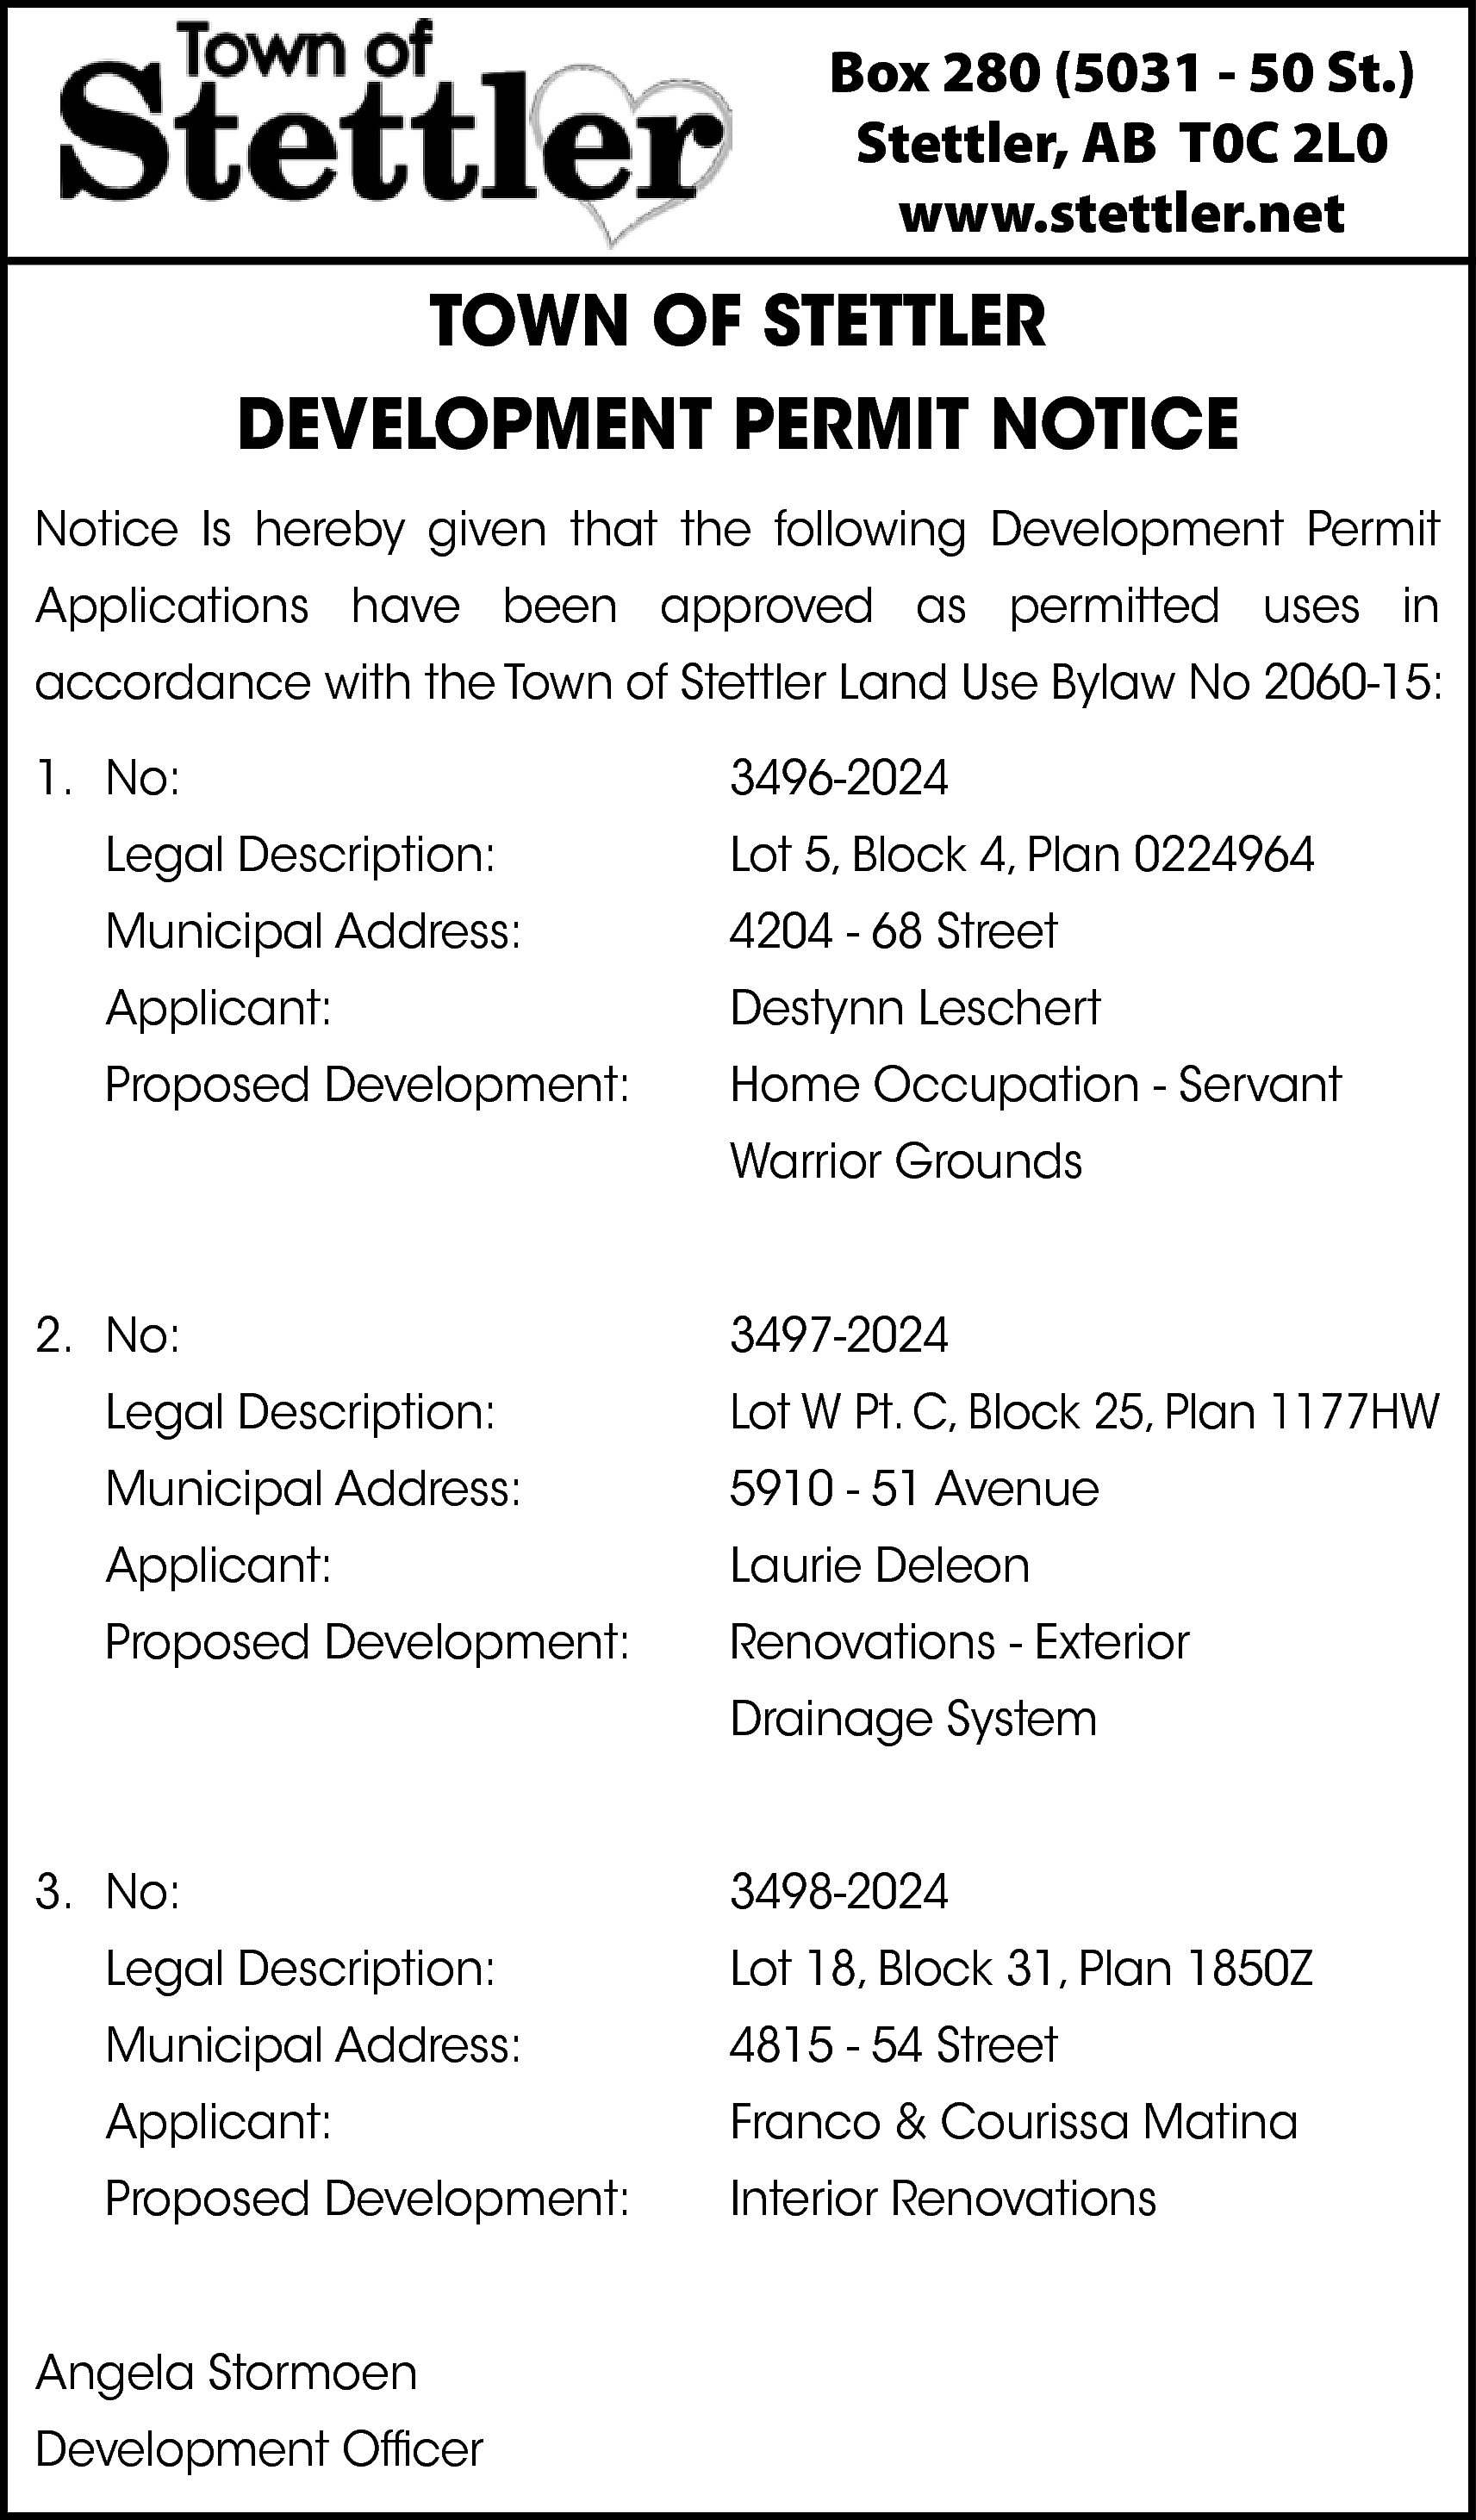 Box 280 (5031 - 50  Box 280 (5031 - 50 St.)  Stettler, AB T0C 2L0  www.stettler.net    TOWN OF STETTLER  DEVELOPMENT PERMIT NOTICE  Notice Is hereby given that the following Development Permit  Applications have been approved as permitted uses in  accordance with the Town of Stettler Land Use Bylaw No 2060-15:  1. No:  Legal Description:    3496-2024  Lot 5, Block 4, Plan 0224964    Municipal Address:    4204 - 68 Street    Applicant:    Destynn Leschert    Proposed Development:    Home Occupation - Servant  Warrior Grounds    2. No:    3497-2024    Legal Description:    Lot W Pt. C, Block 25, Plan 1177HW    Municipal Address:    5910 - 51 Avenue    Applicant:    Laurie Deleon    Proposed Development:    Renovations - Exterior  Drainage System    3. No:    3498-2024    Legal Description:    Lot 18, Block 31, Plan 1850Z    Municipal Address:    4815 - 54 Street    Applicant:    Franco & Courissa Matina    Proposed Development:    Interior Renovations    Angela Stormoen  Development Officer    